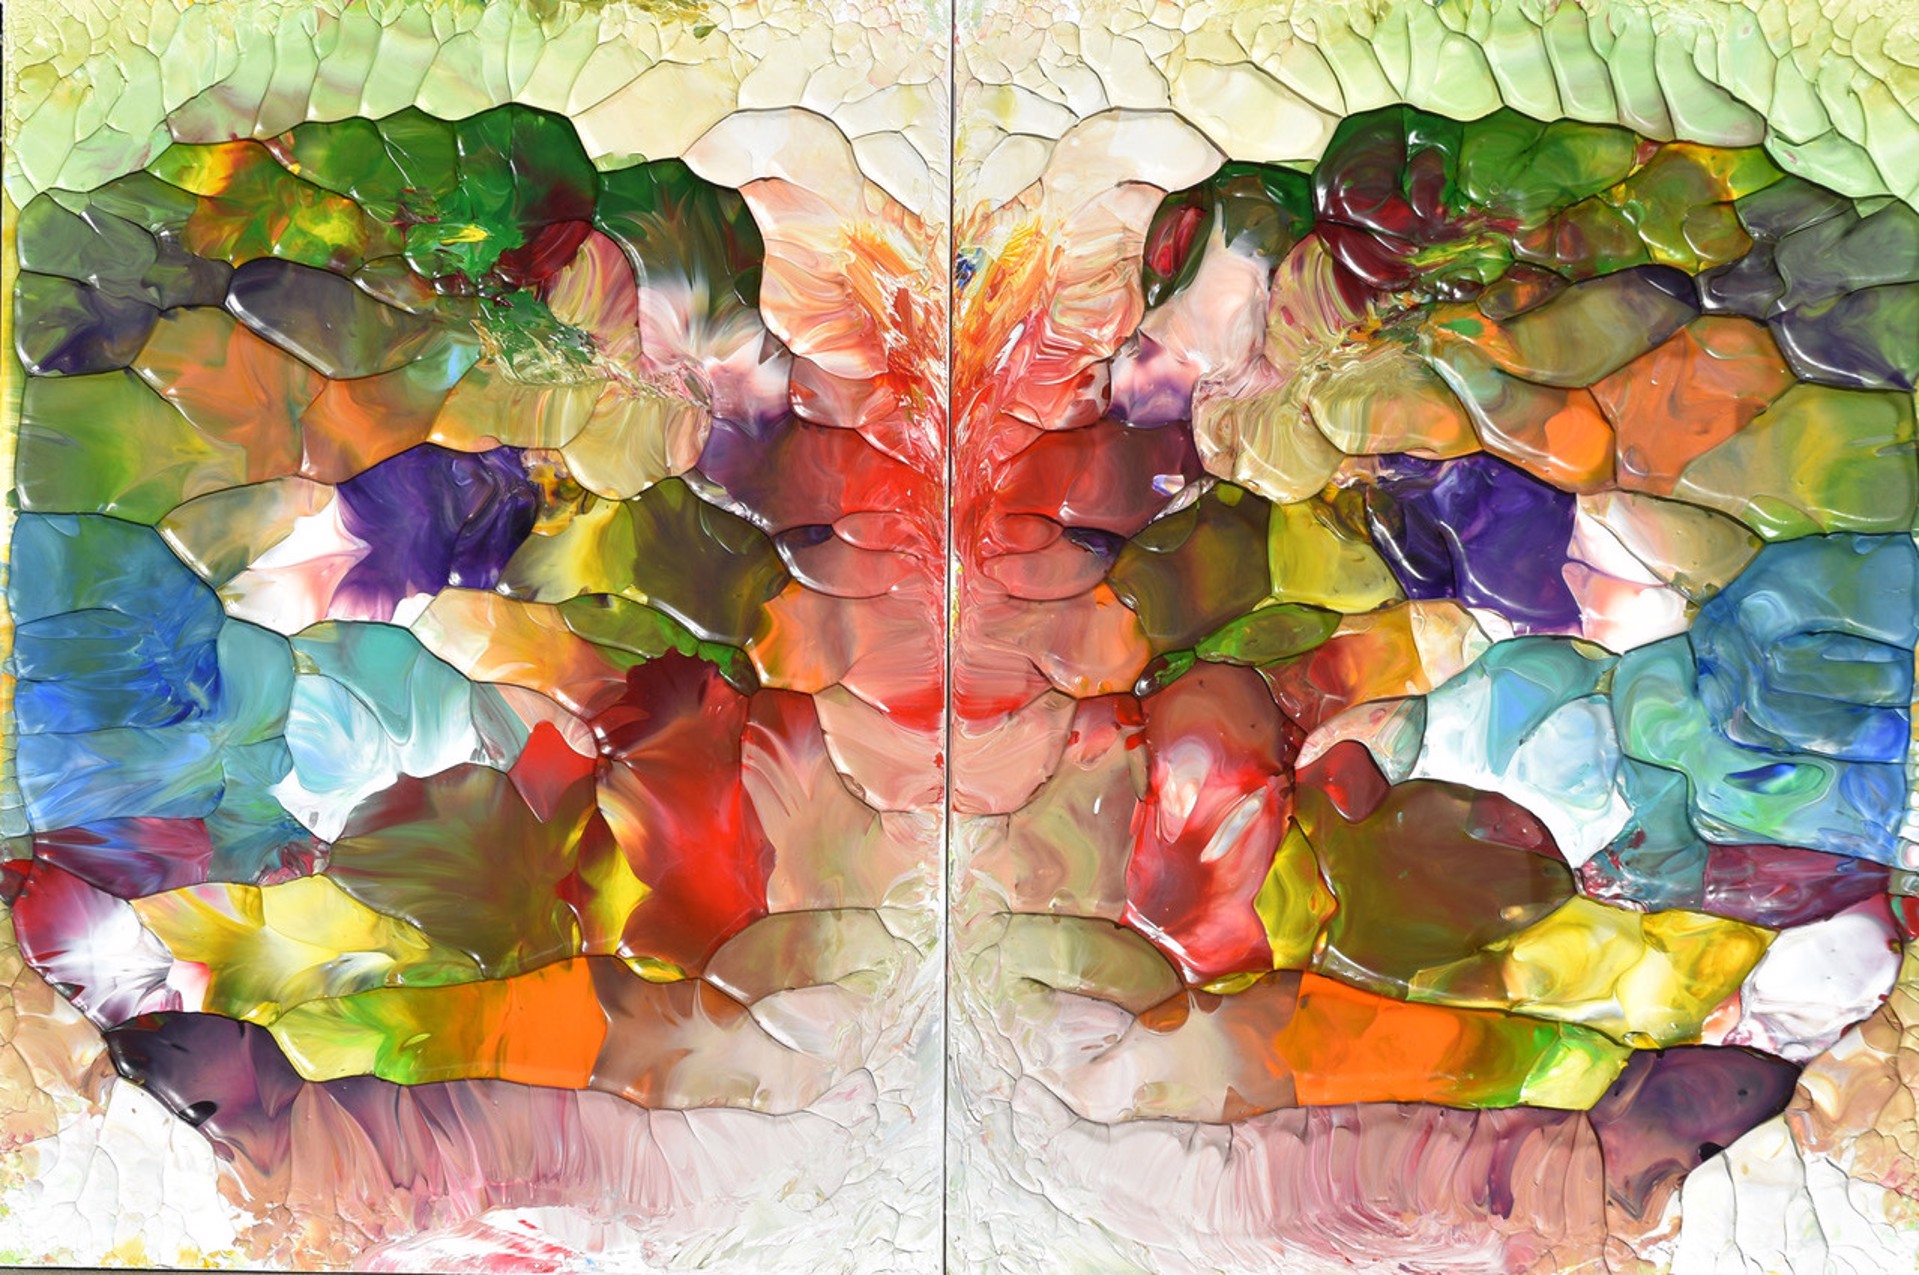 Our Garden, Our Lives Diptych - Transformational Series by James C. LEONARD